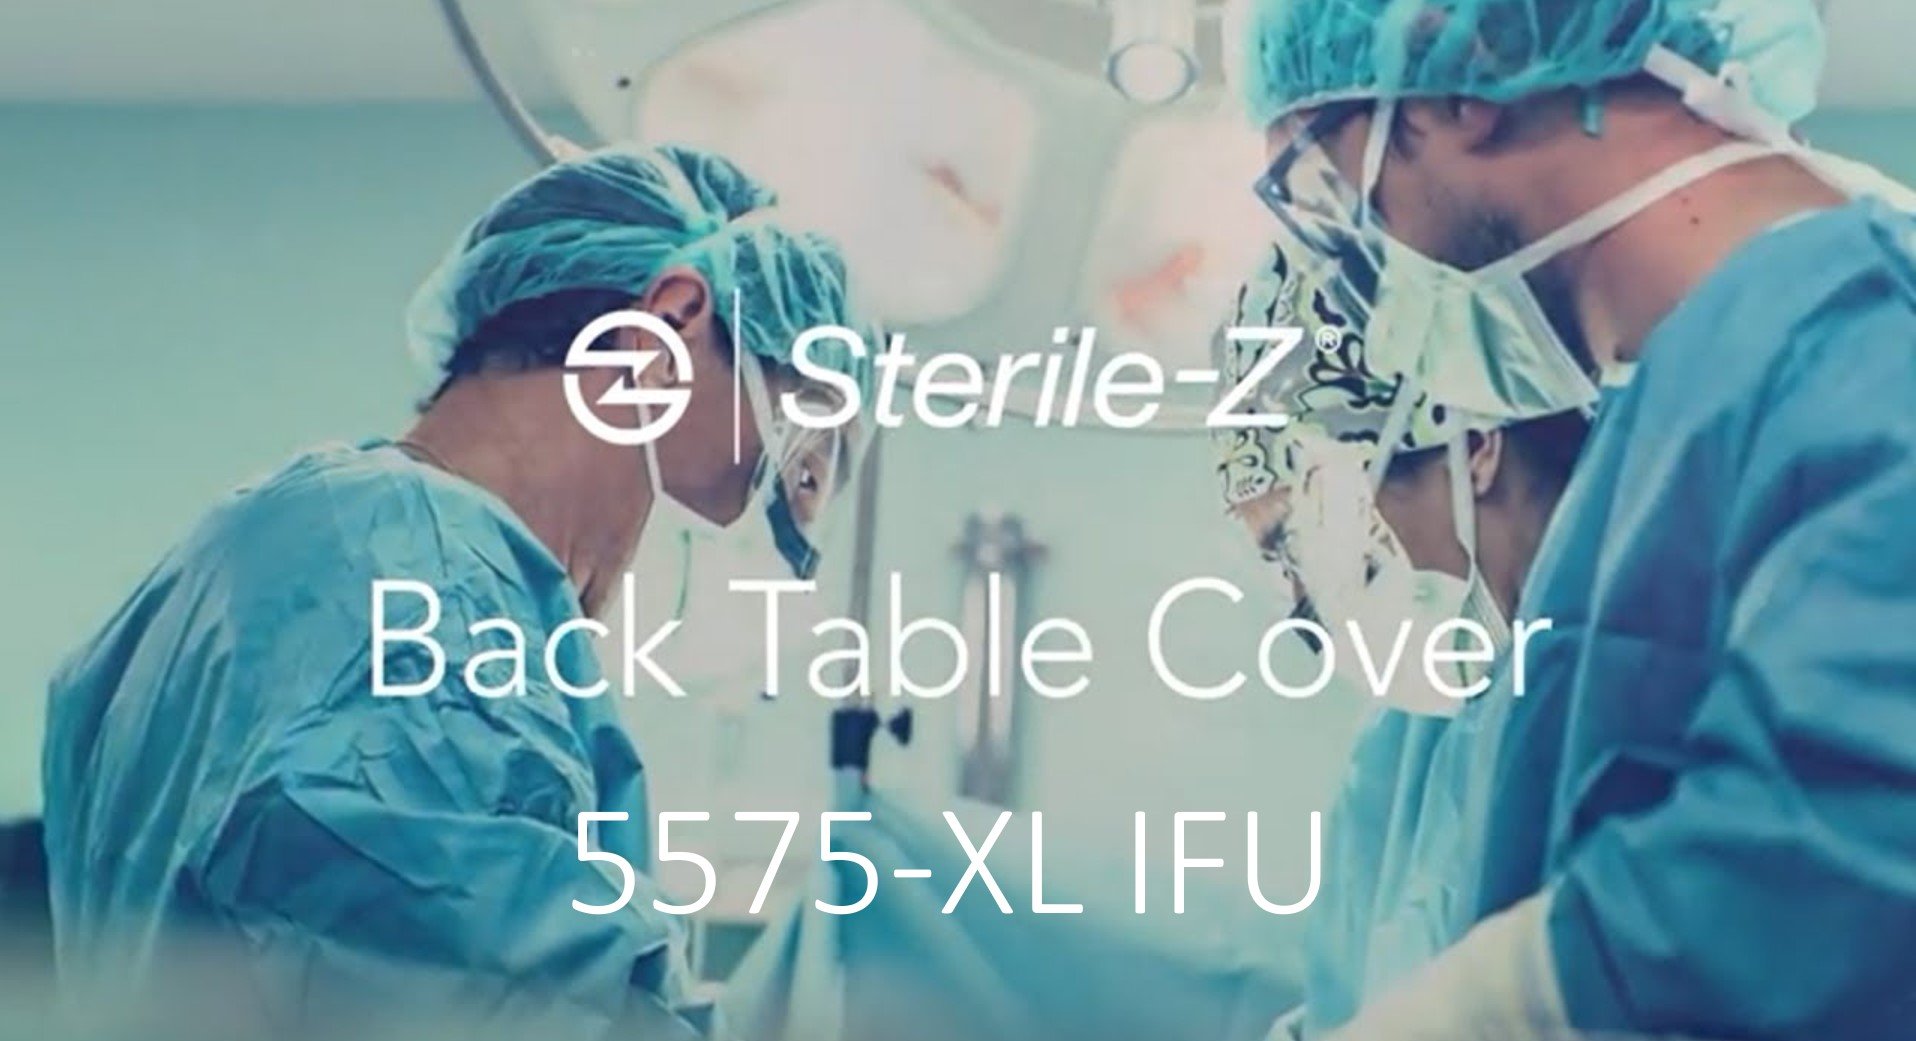 sterile-z-back-table-cover-5575-XL-IFU